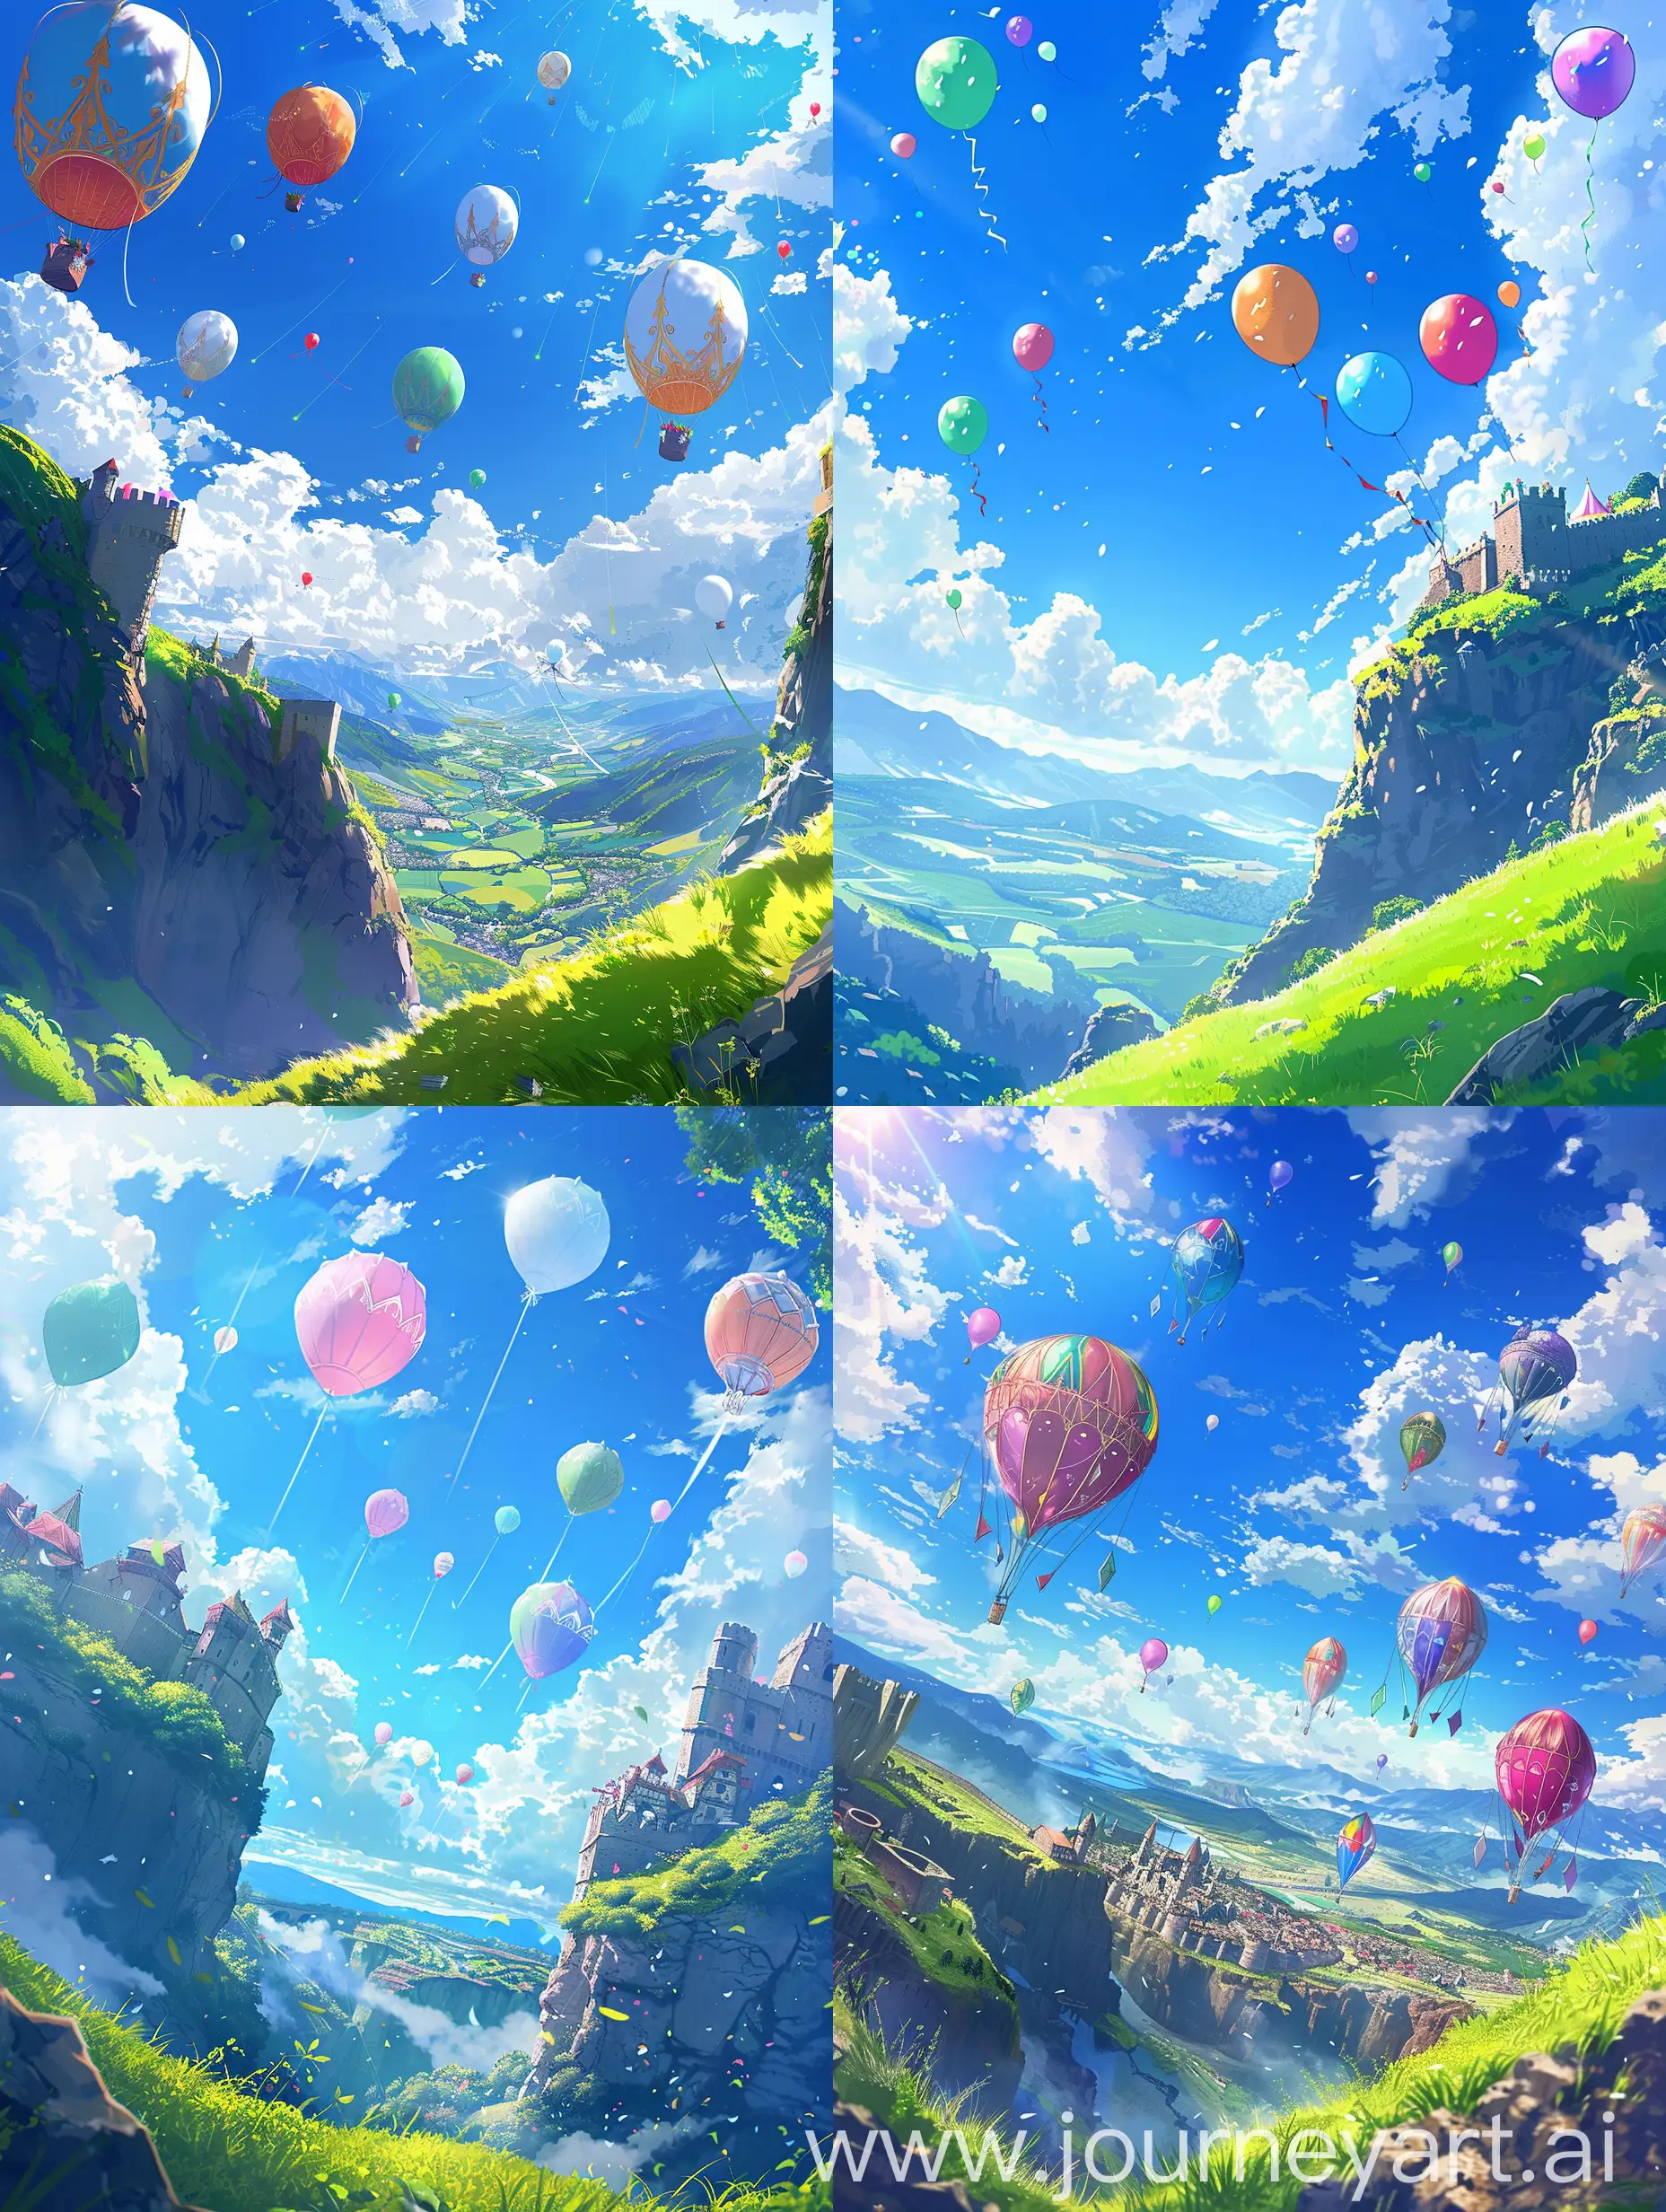 Medieval kingdom, blue sky, white clouds, sunshine.  Different-colored balloons rise from the Kingdom towards the sky as if there is a celebration there, viewed from outside the Kingdom, from a mountain hill with bright green grass.  Anime style.